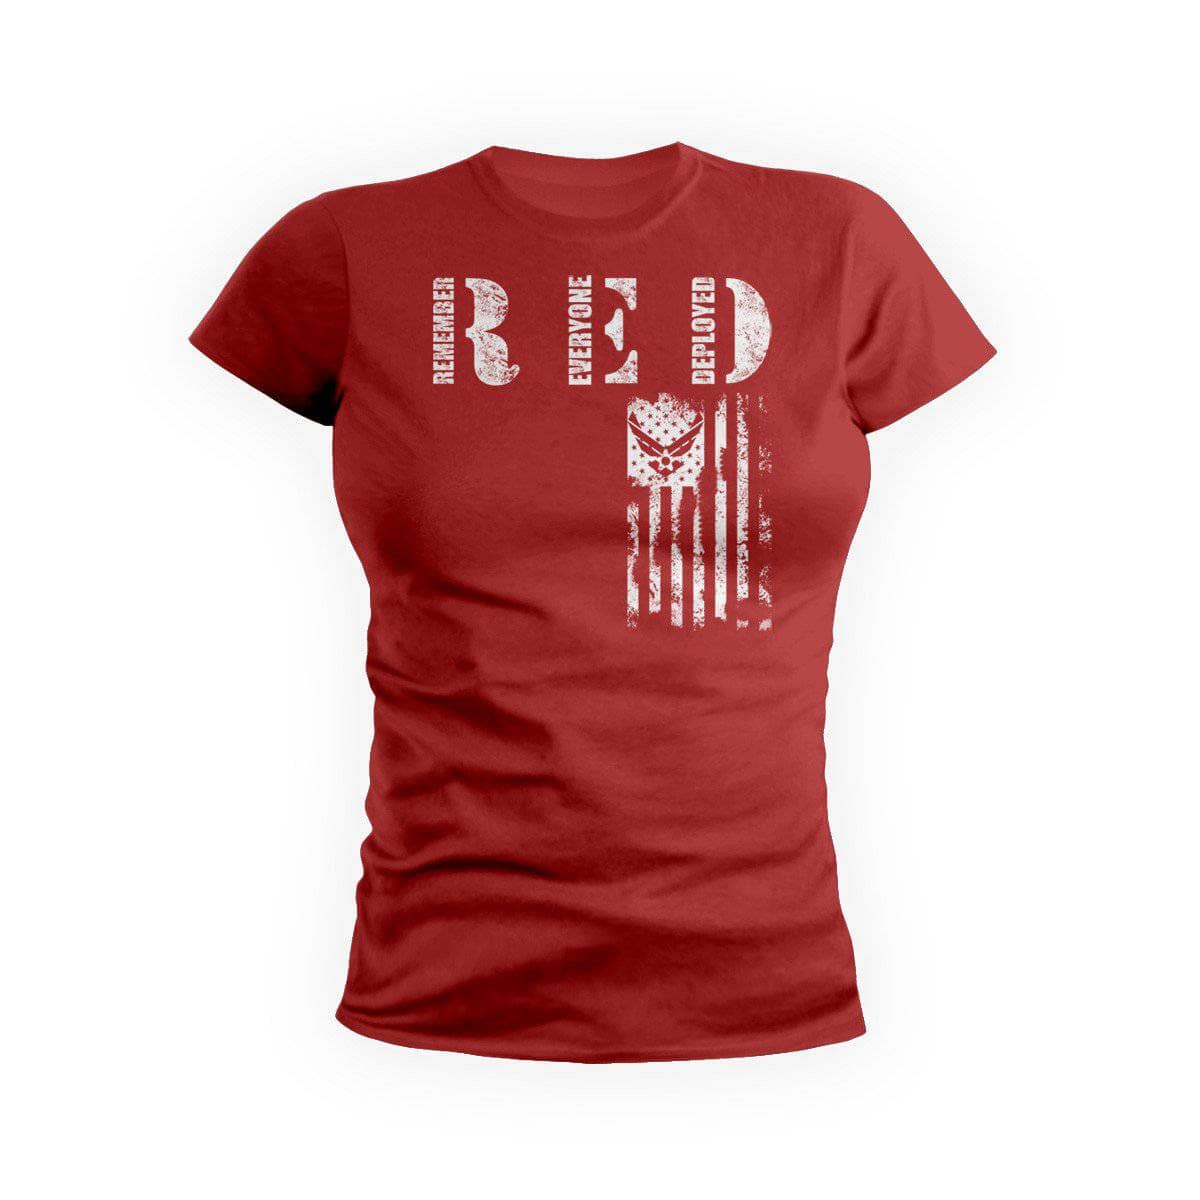 red on friday shirts